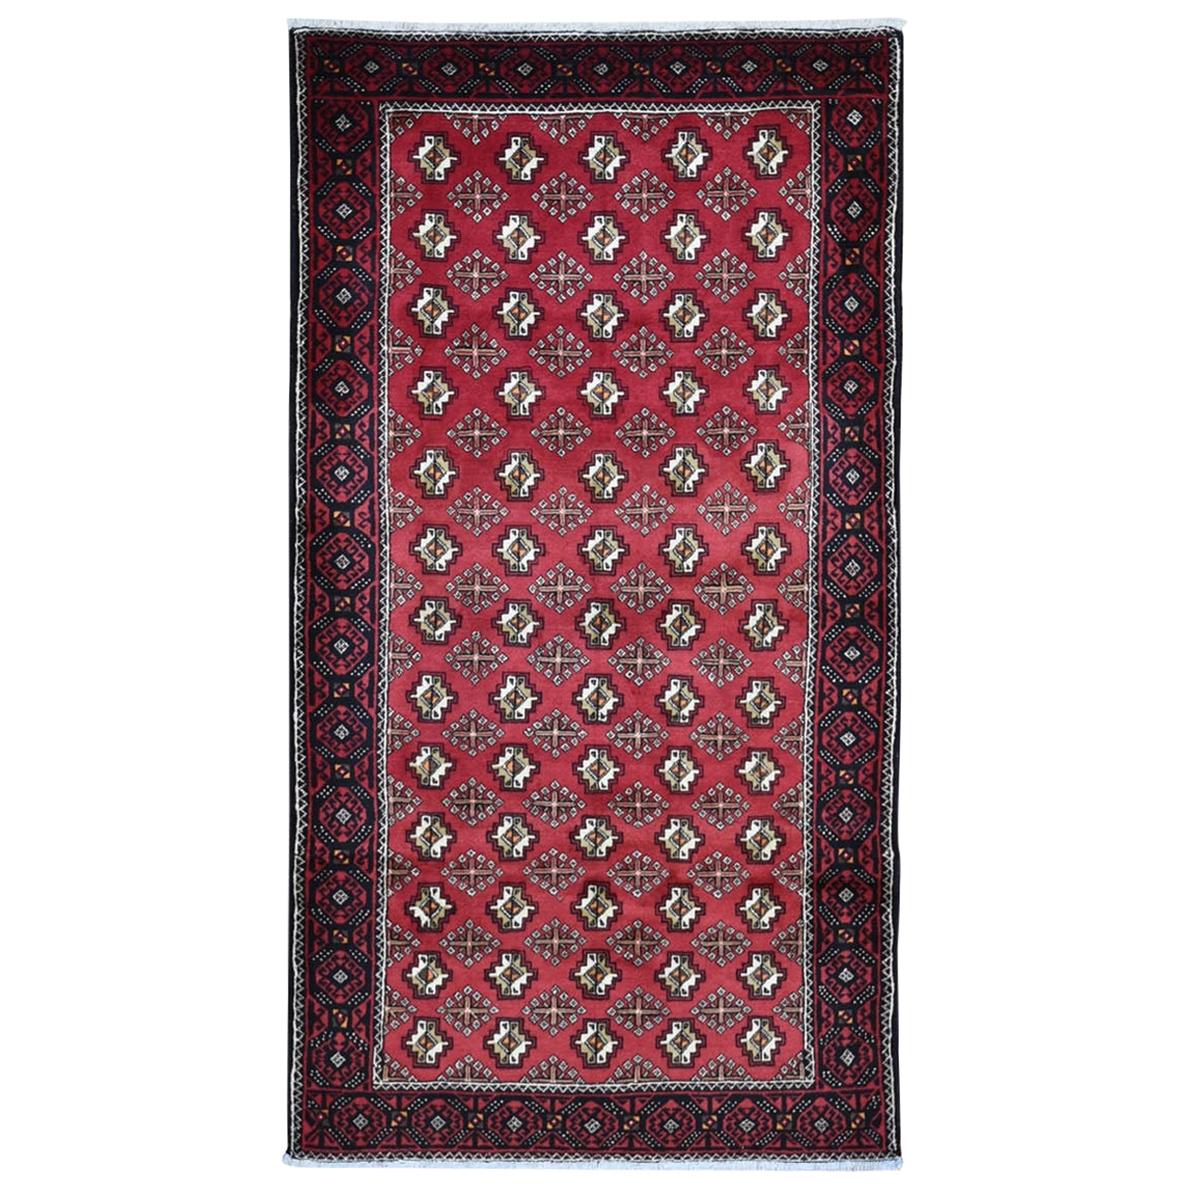 Red Vintage Persian Baluch Geometric Design Hand Knotted Oriental Rug, 4'4"x8'3"